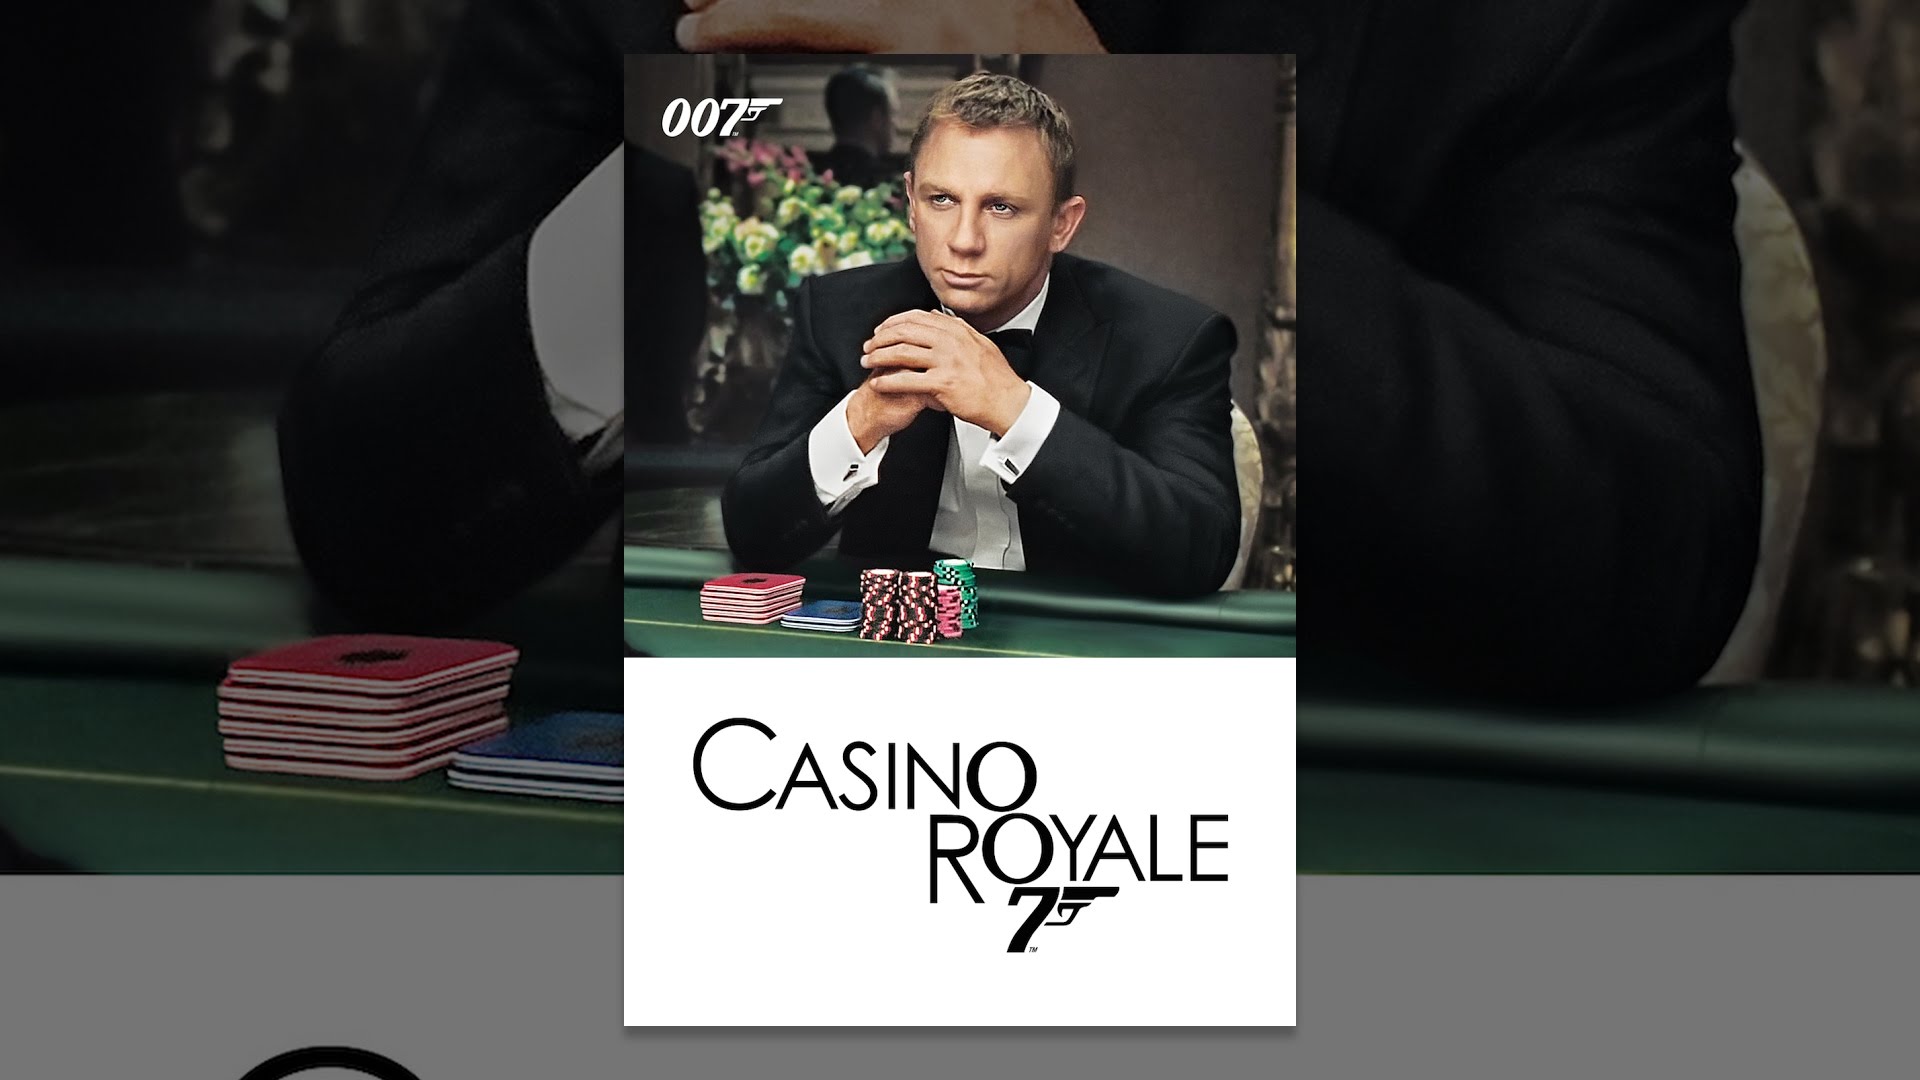 casino royale 2006 watch online 123movies